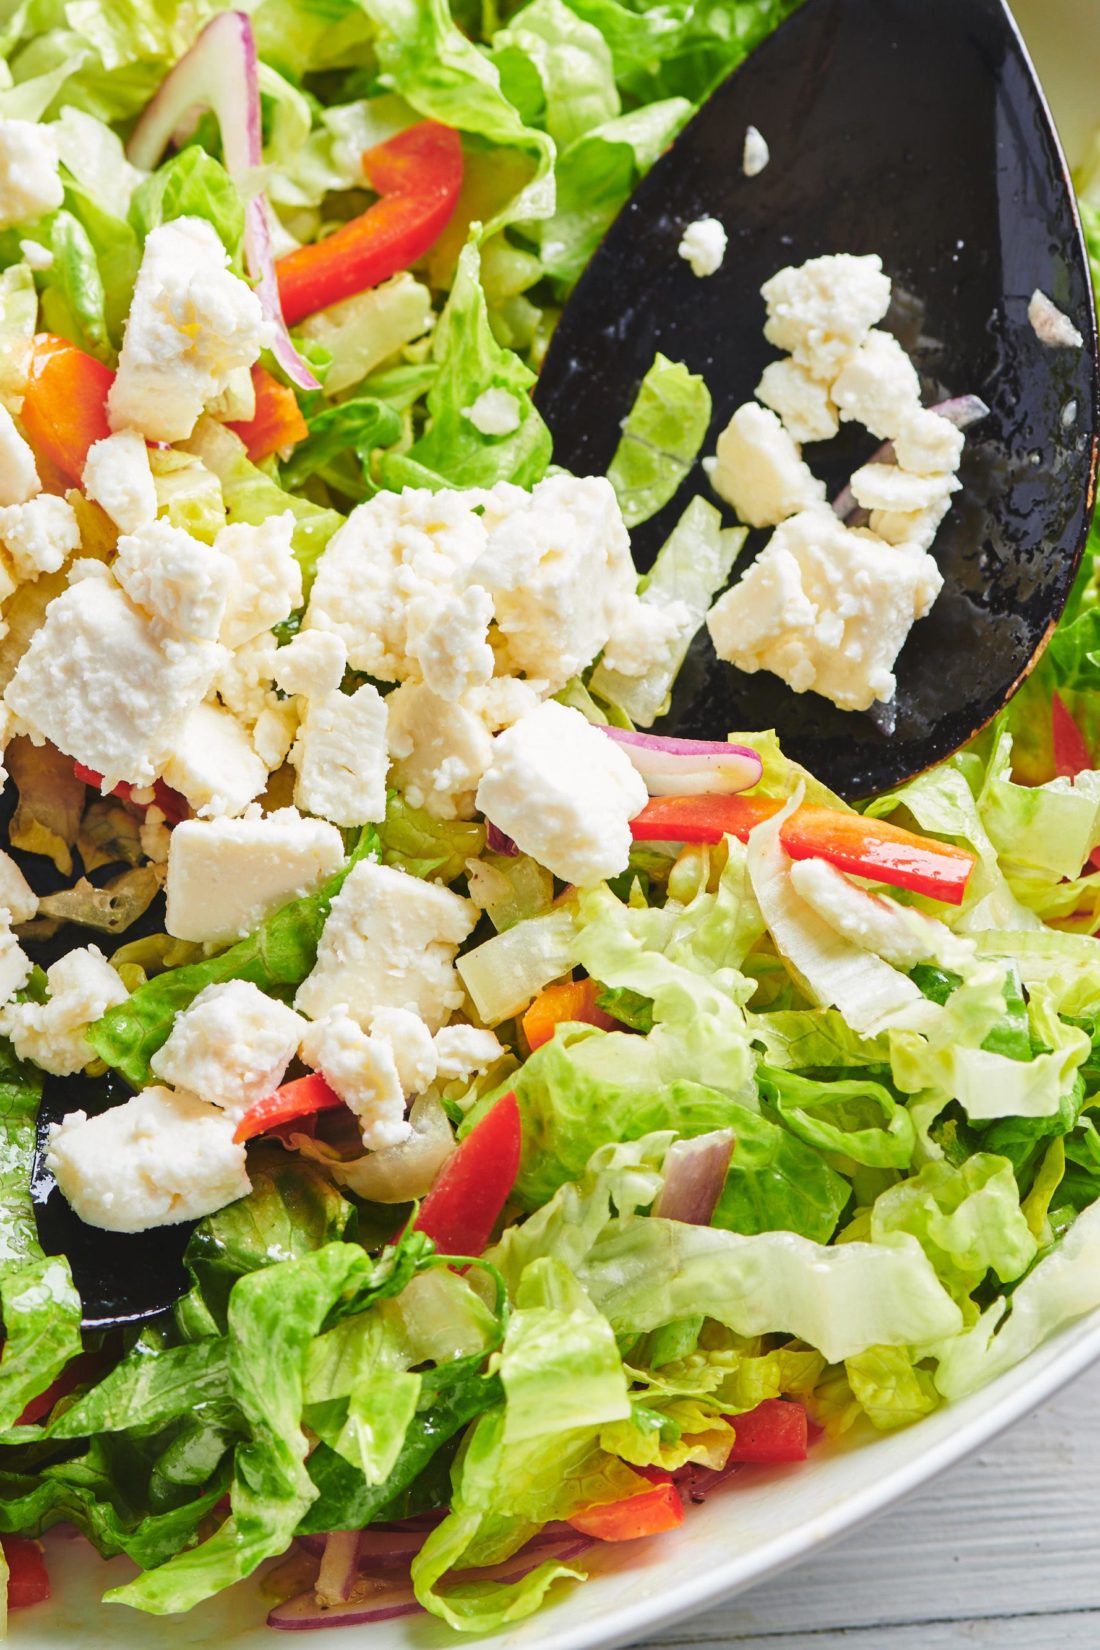 Spoon putting Queso Fresco on a Romaine Salad.